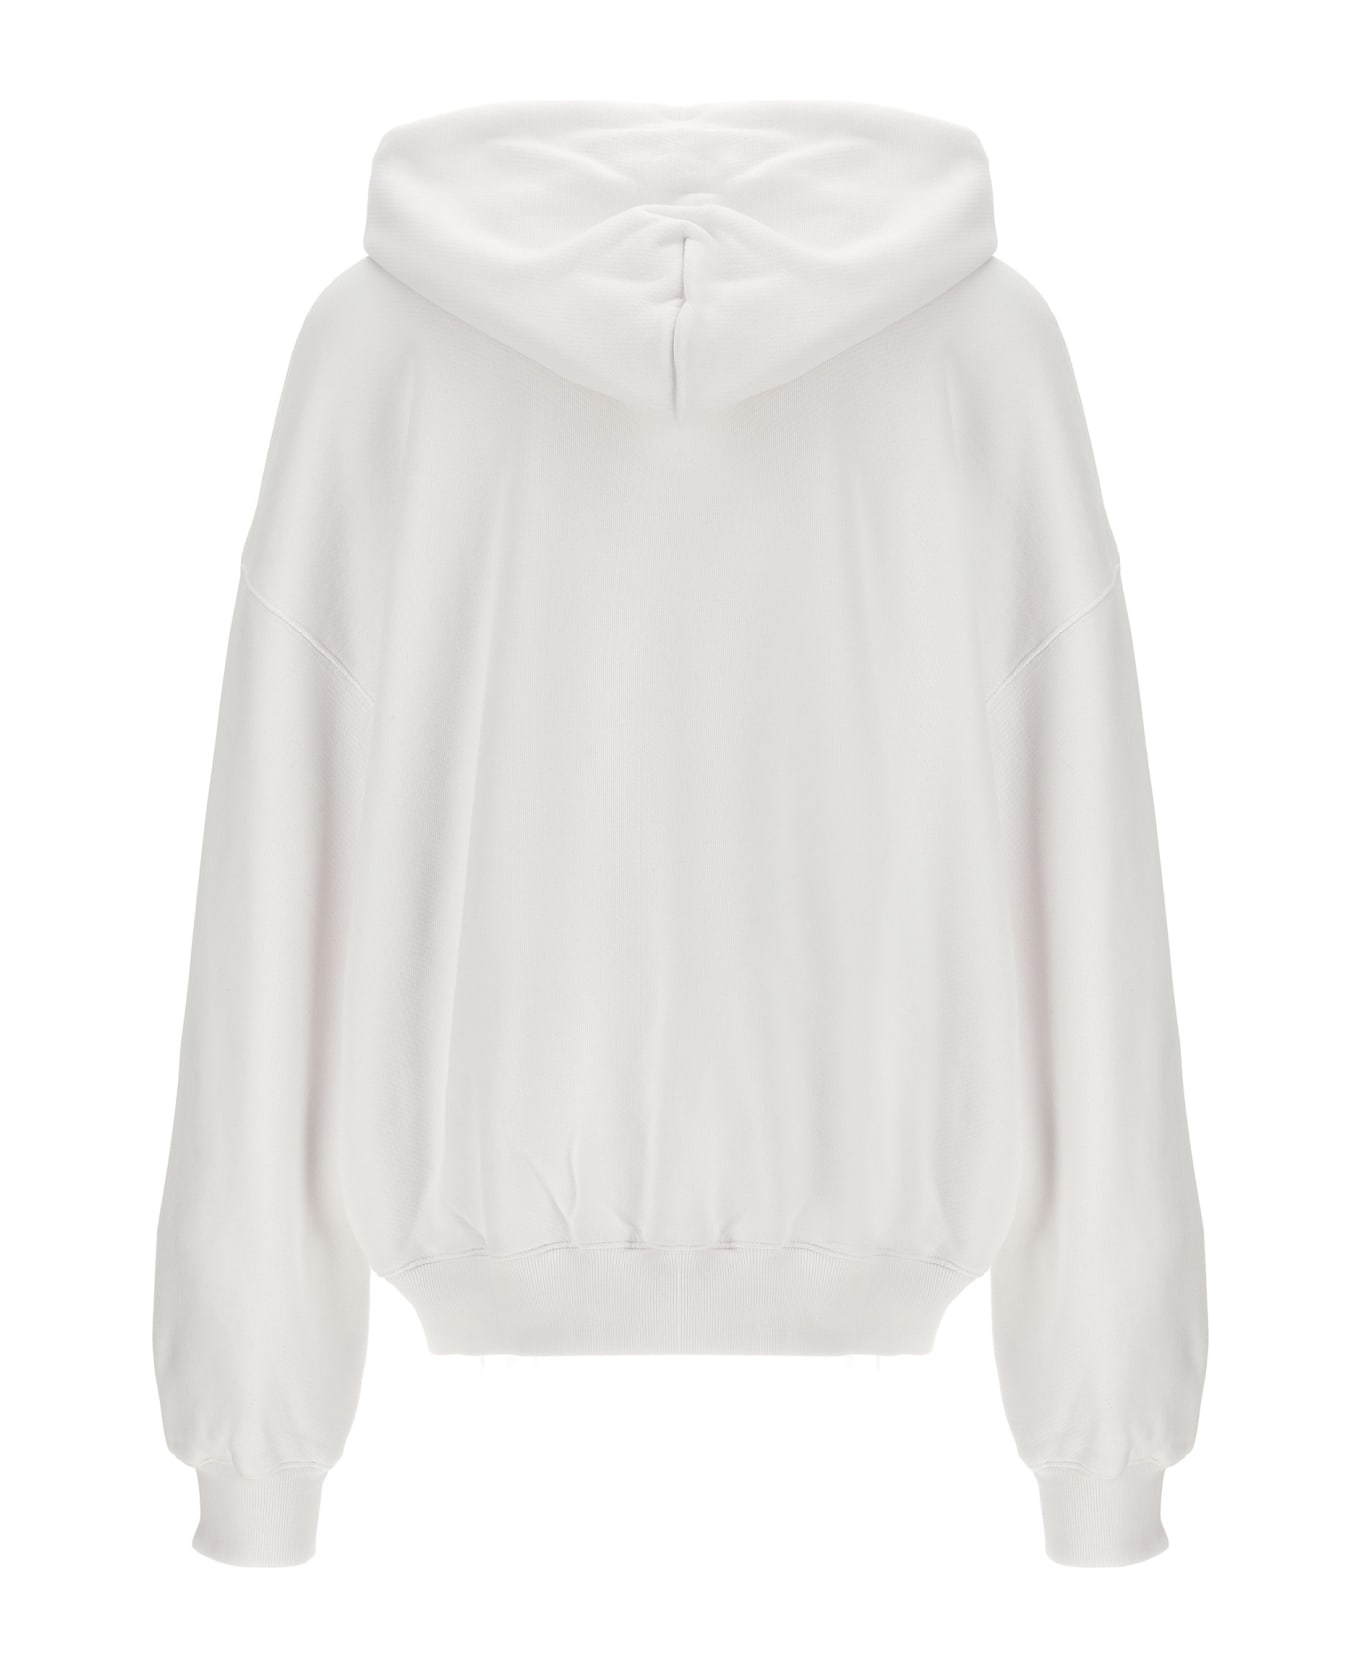 Off-White Off Stamp' Hoodie - White